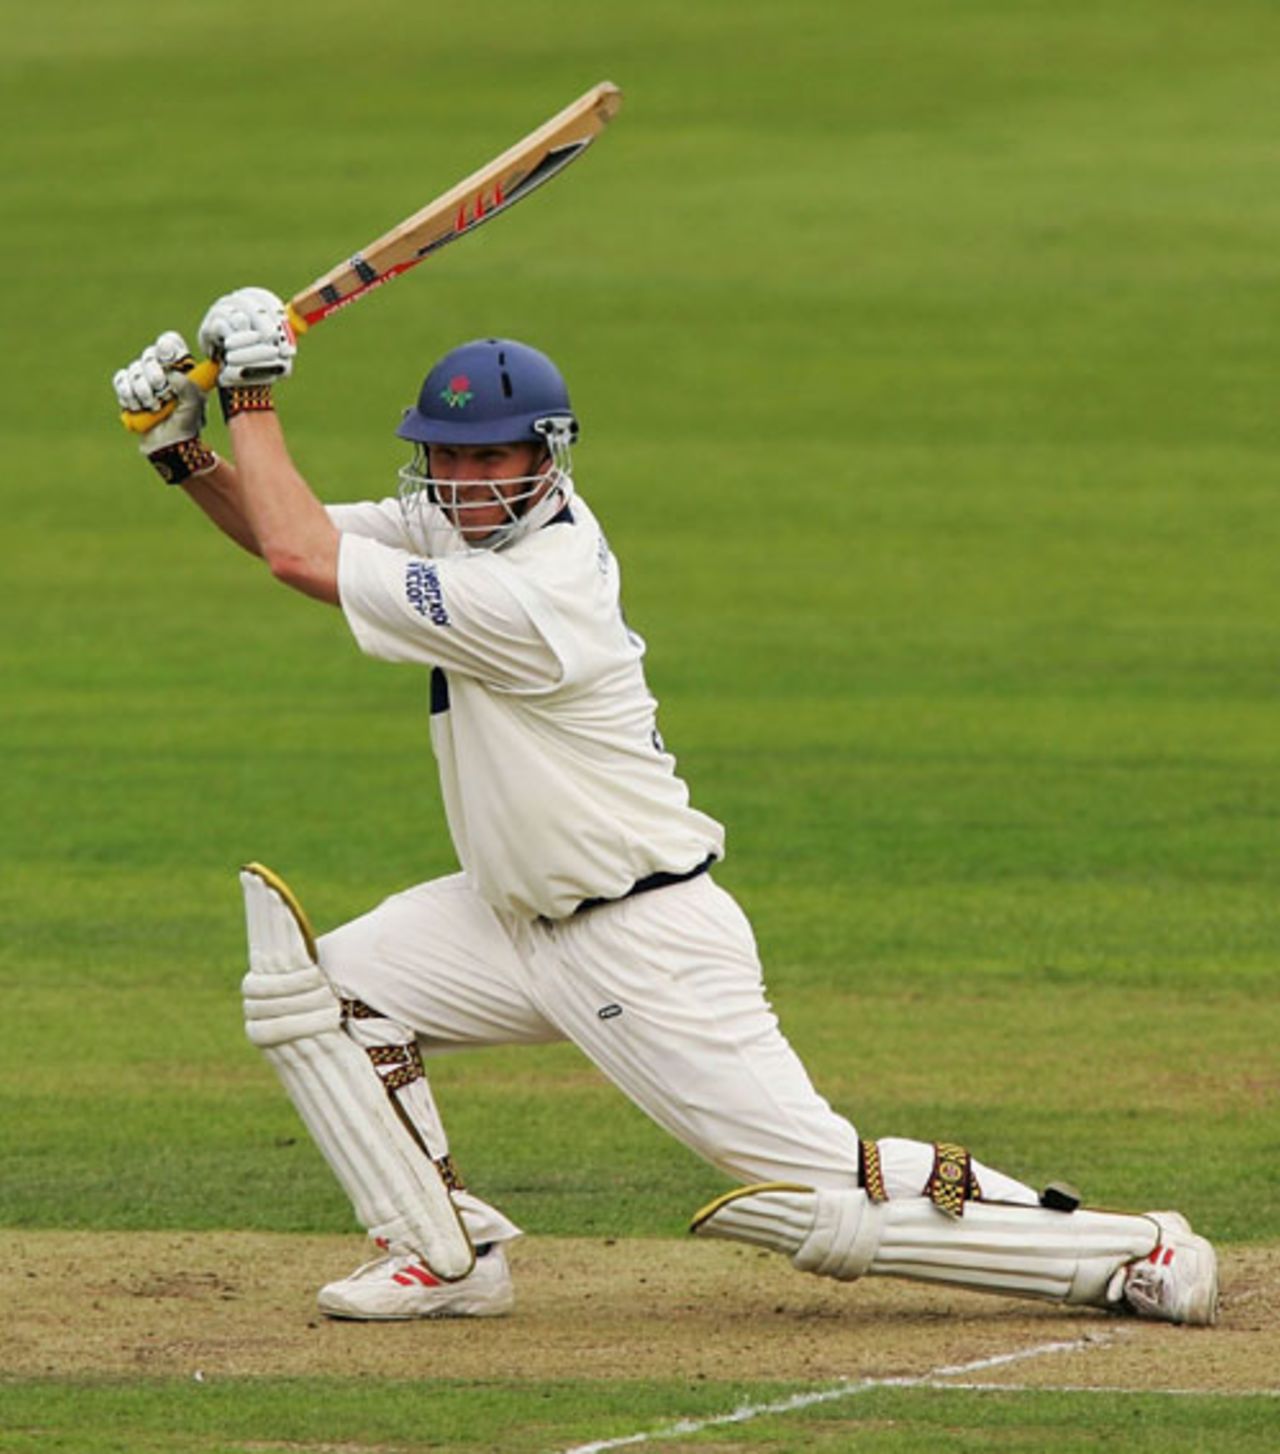 Iain Sutcliffe on his way to a hundred, Lancashire v Warwickshire, County Championship, Blackpool, August 30, 2006